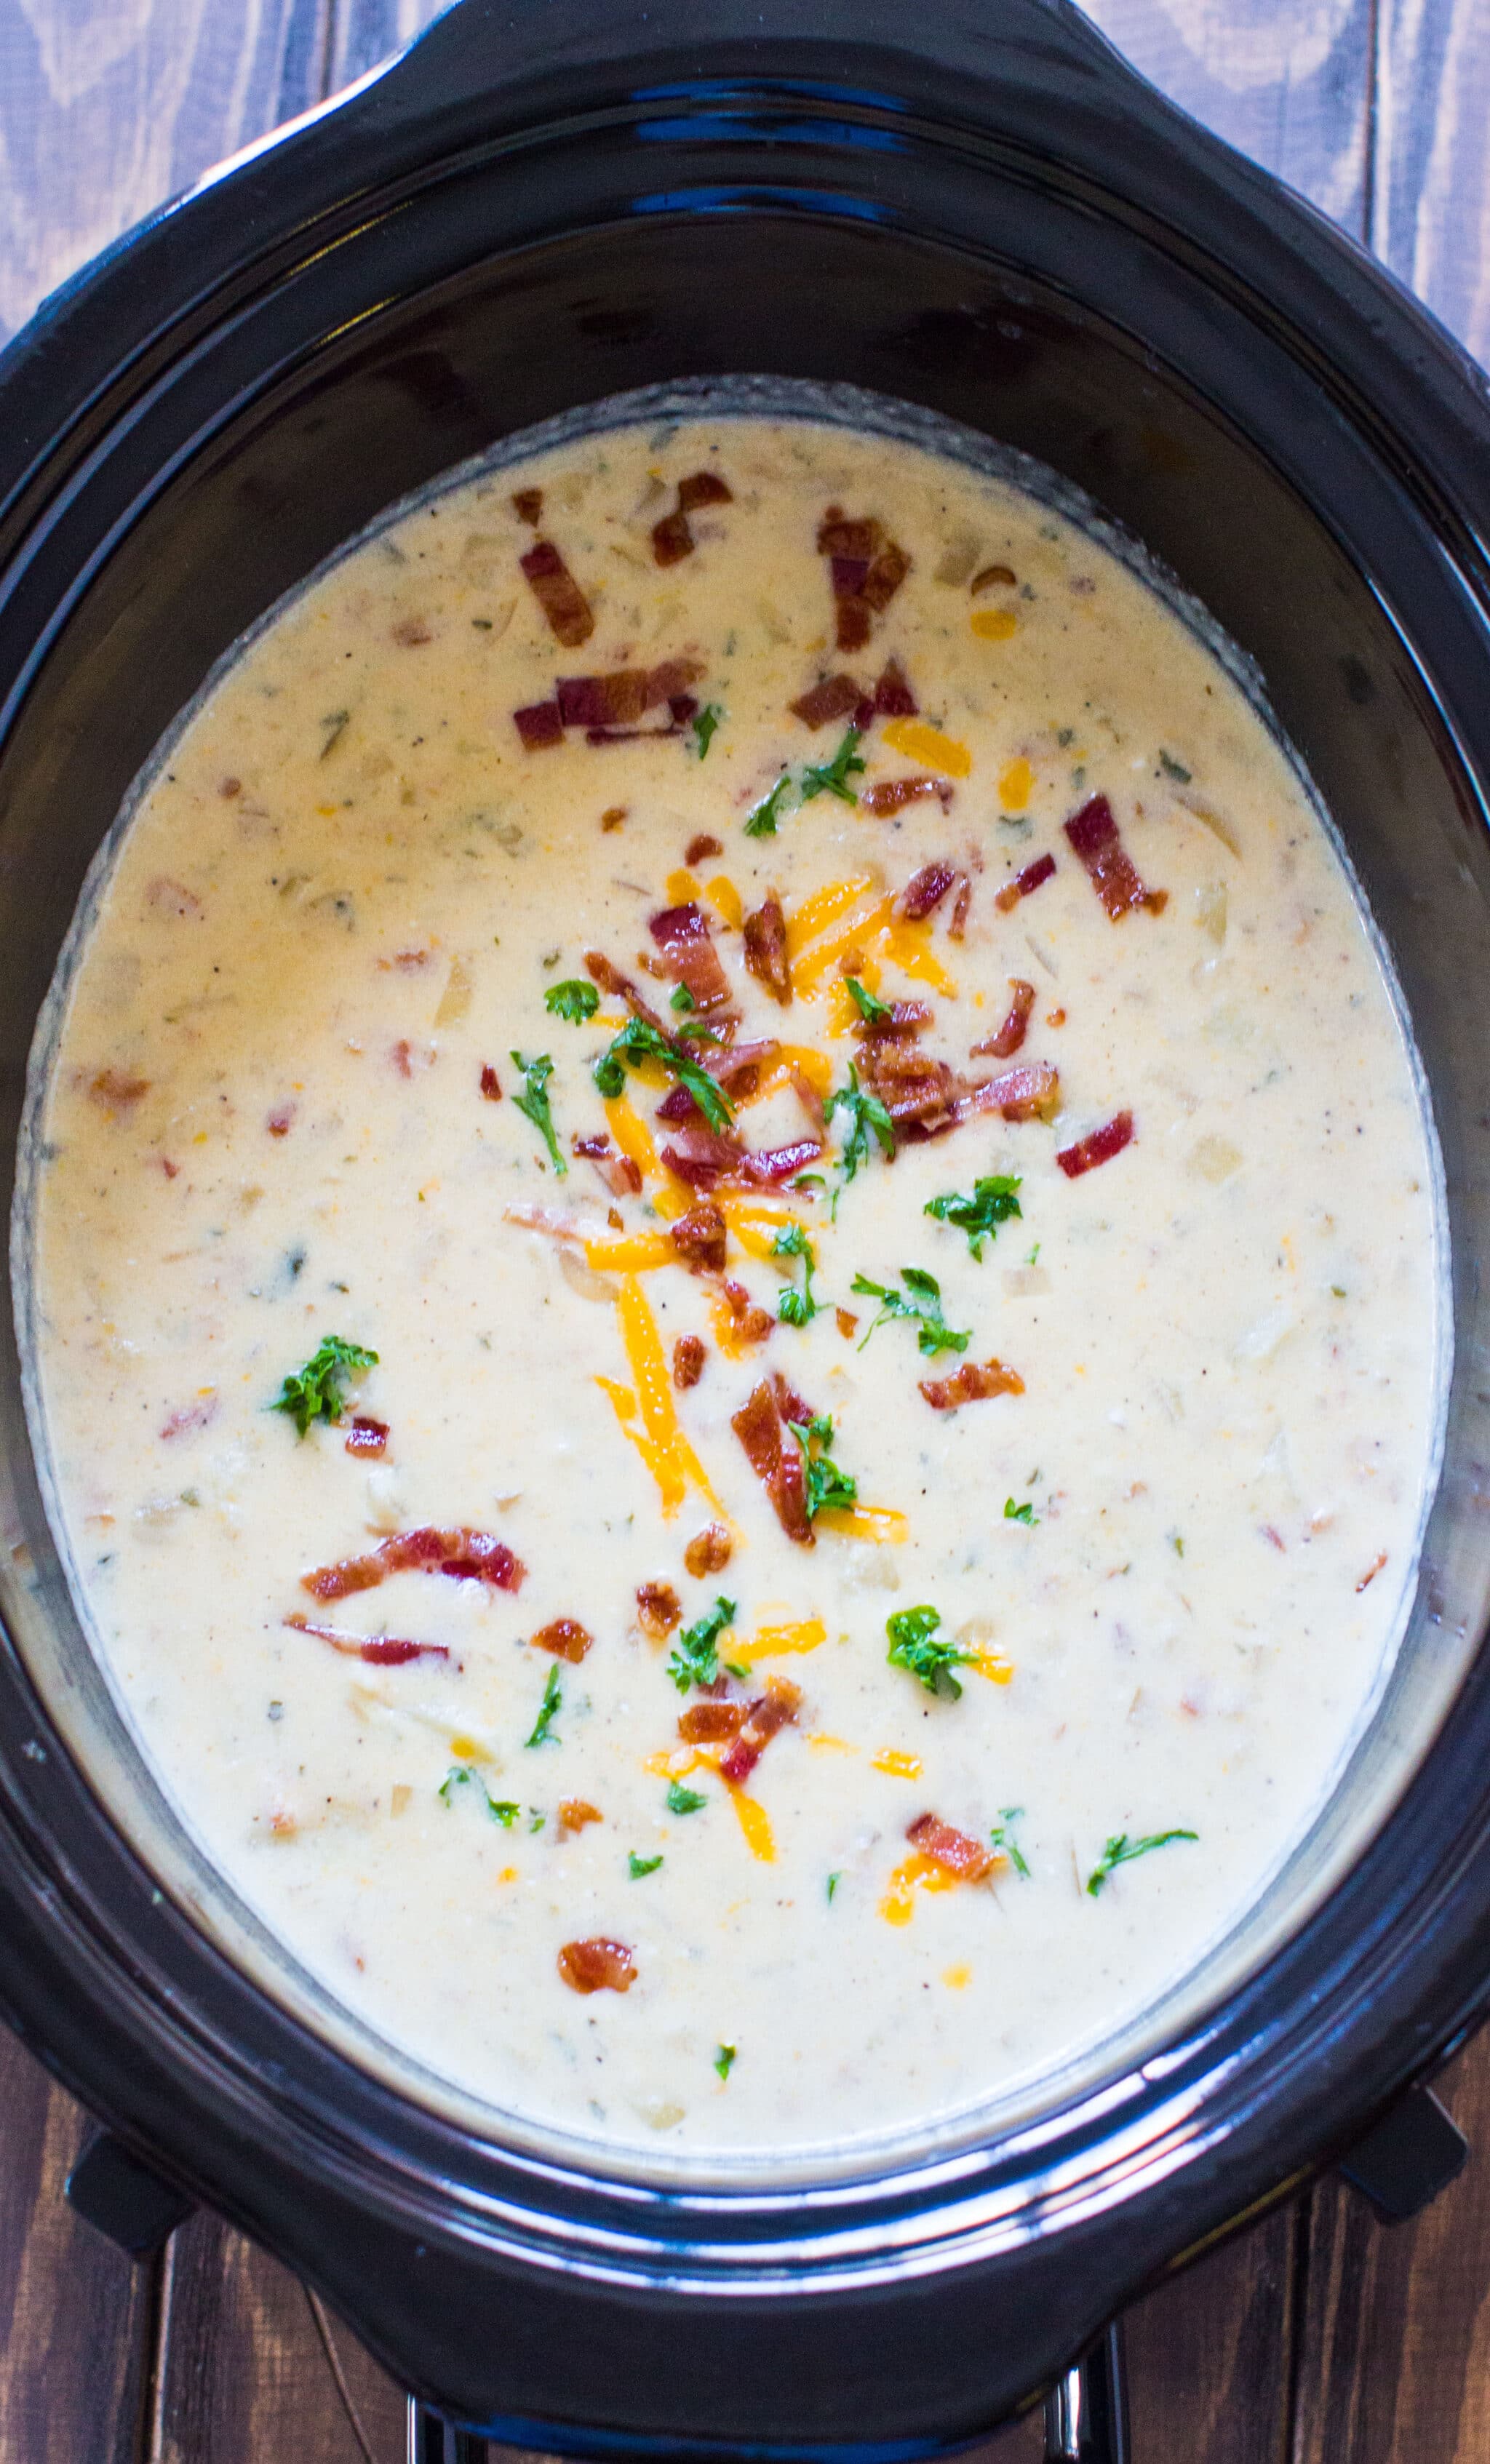 Slow Cooker Baked Potato Soup - Sweet and Savory Meals